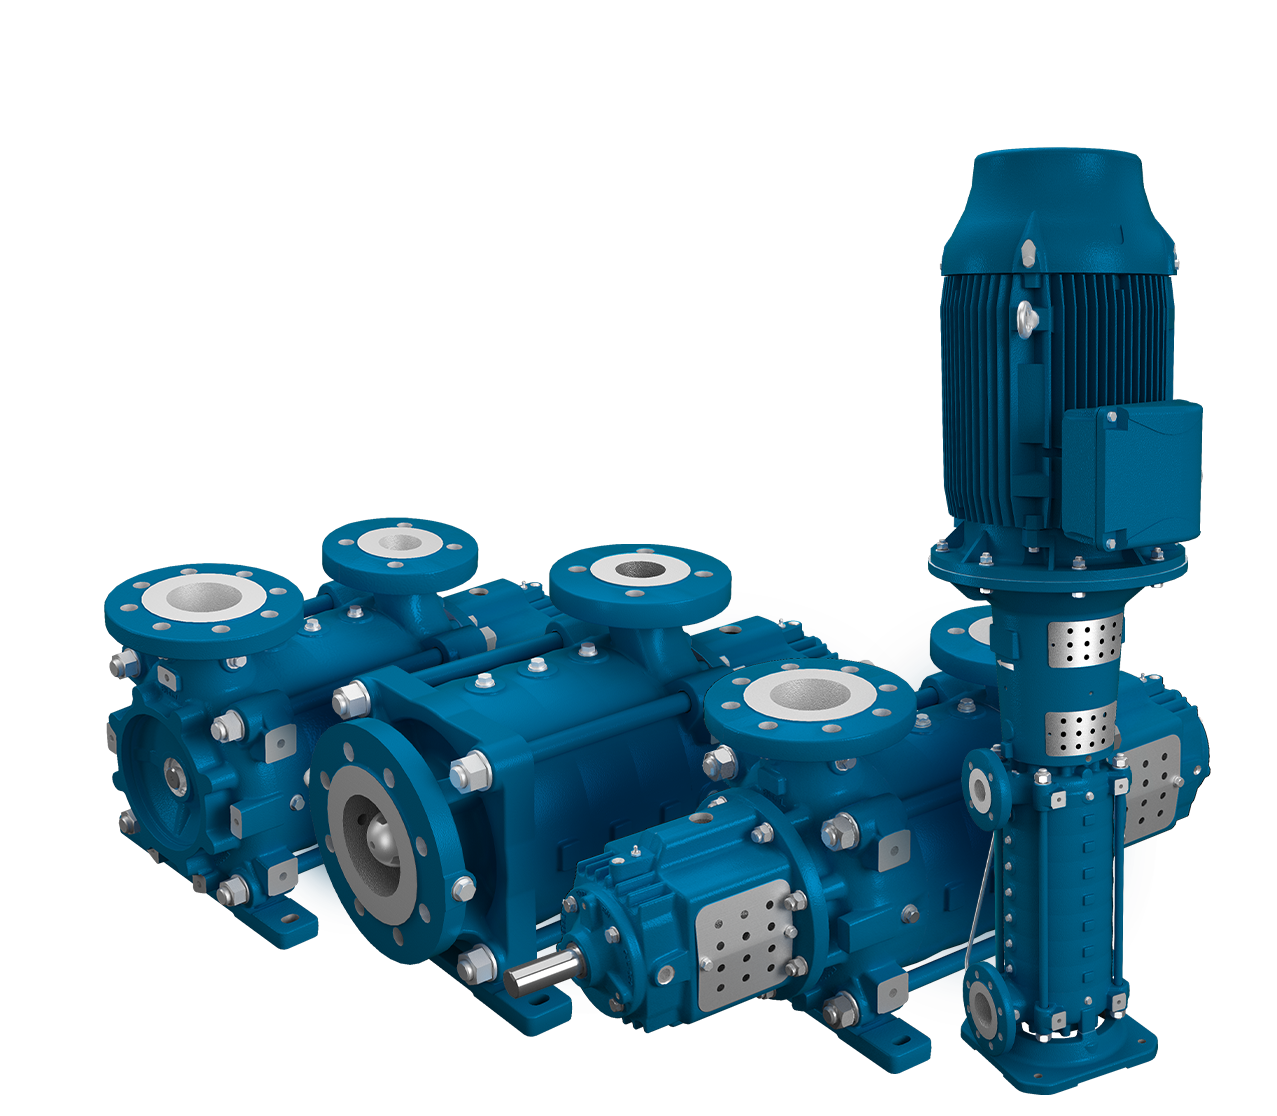 The e-MP is a multistage ring section pump designed for high-pressure applications.